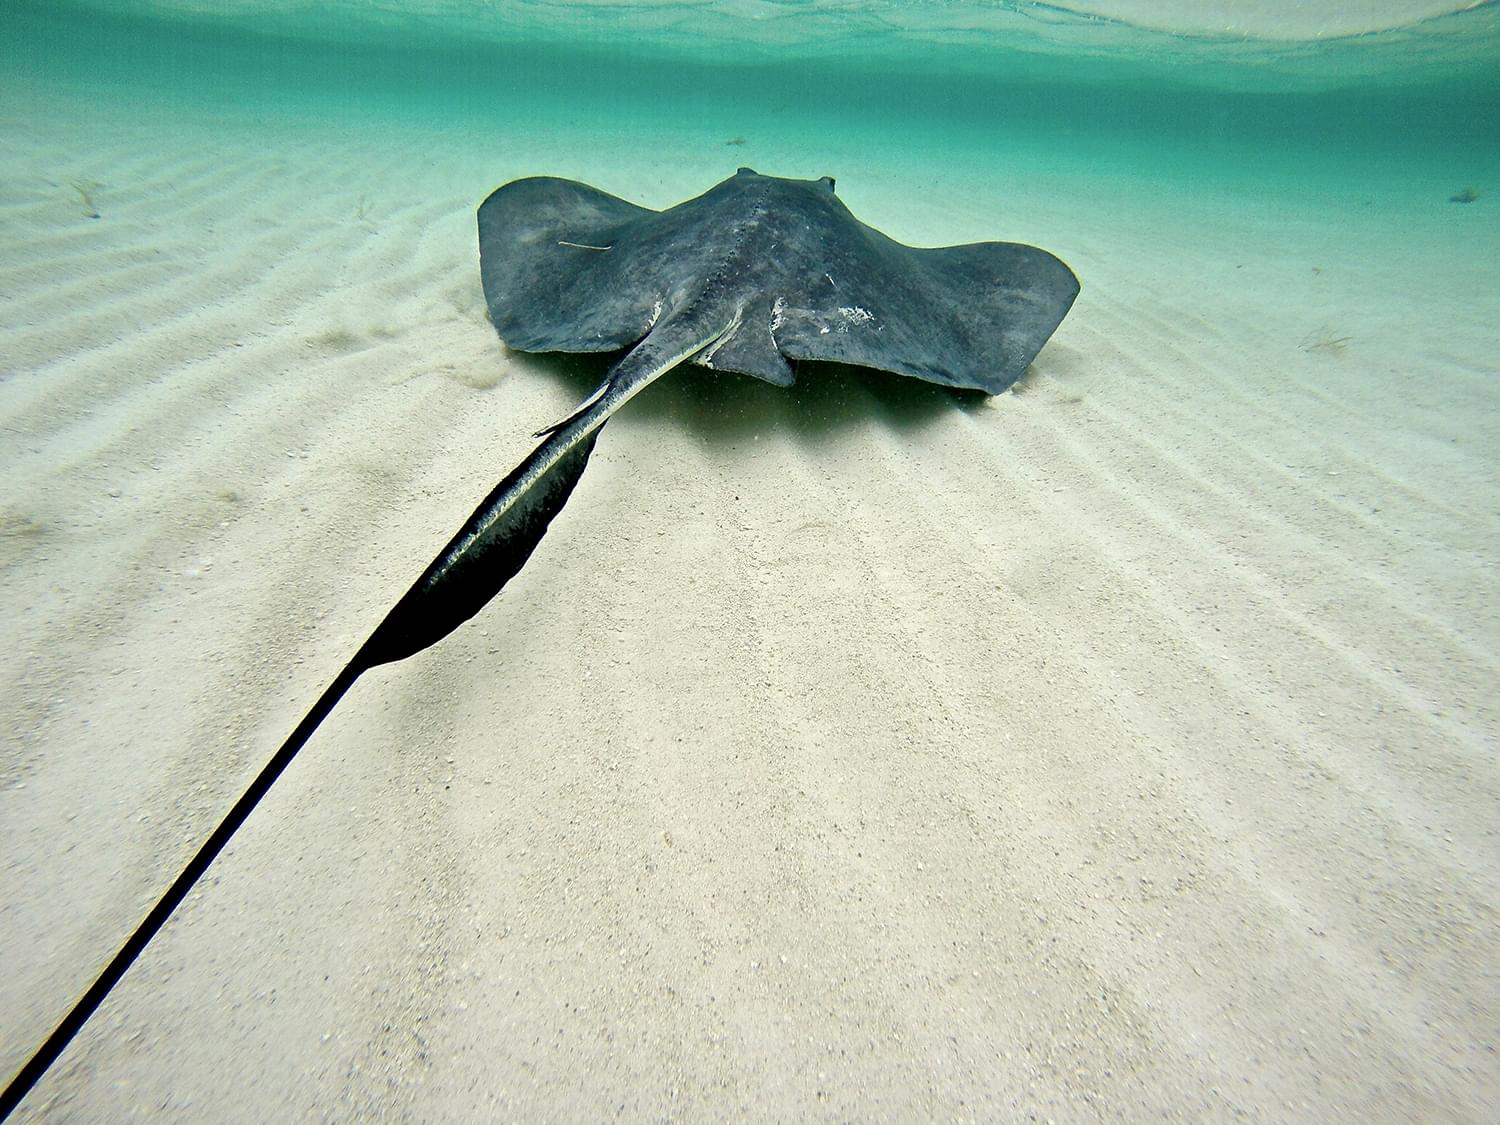 A Southern stingray swims away from the team following capture